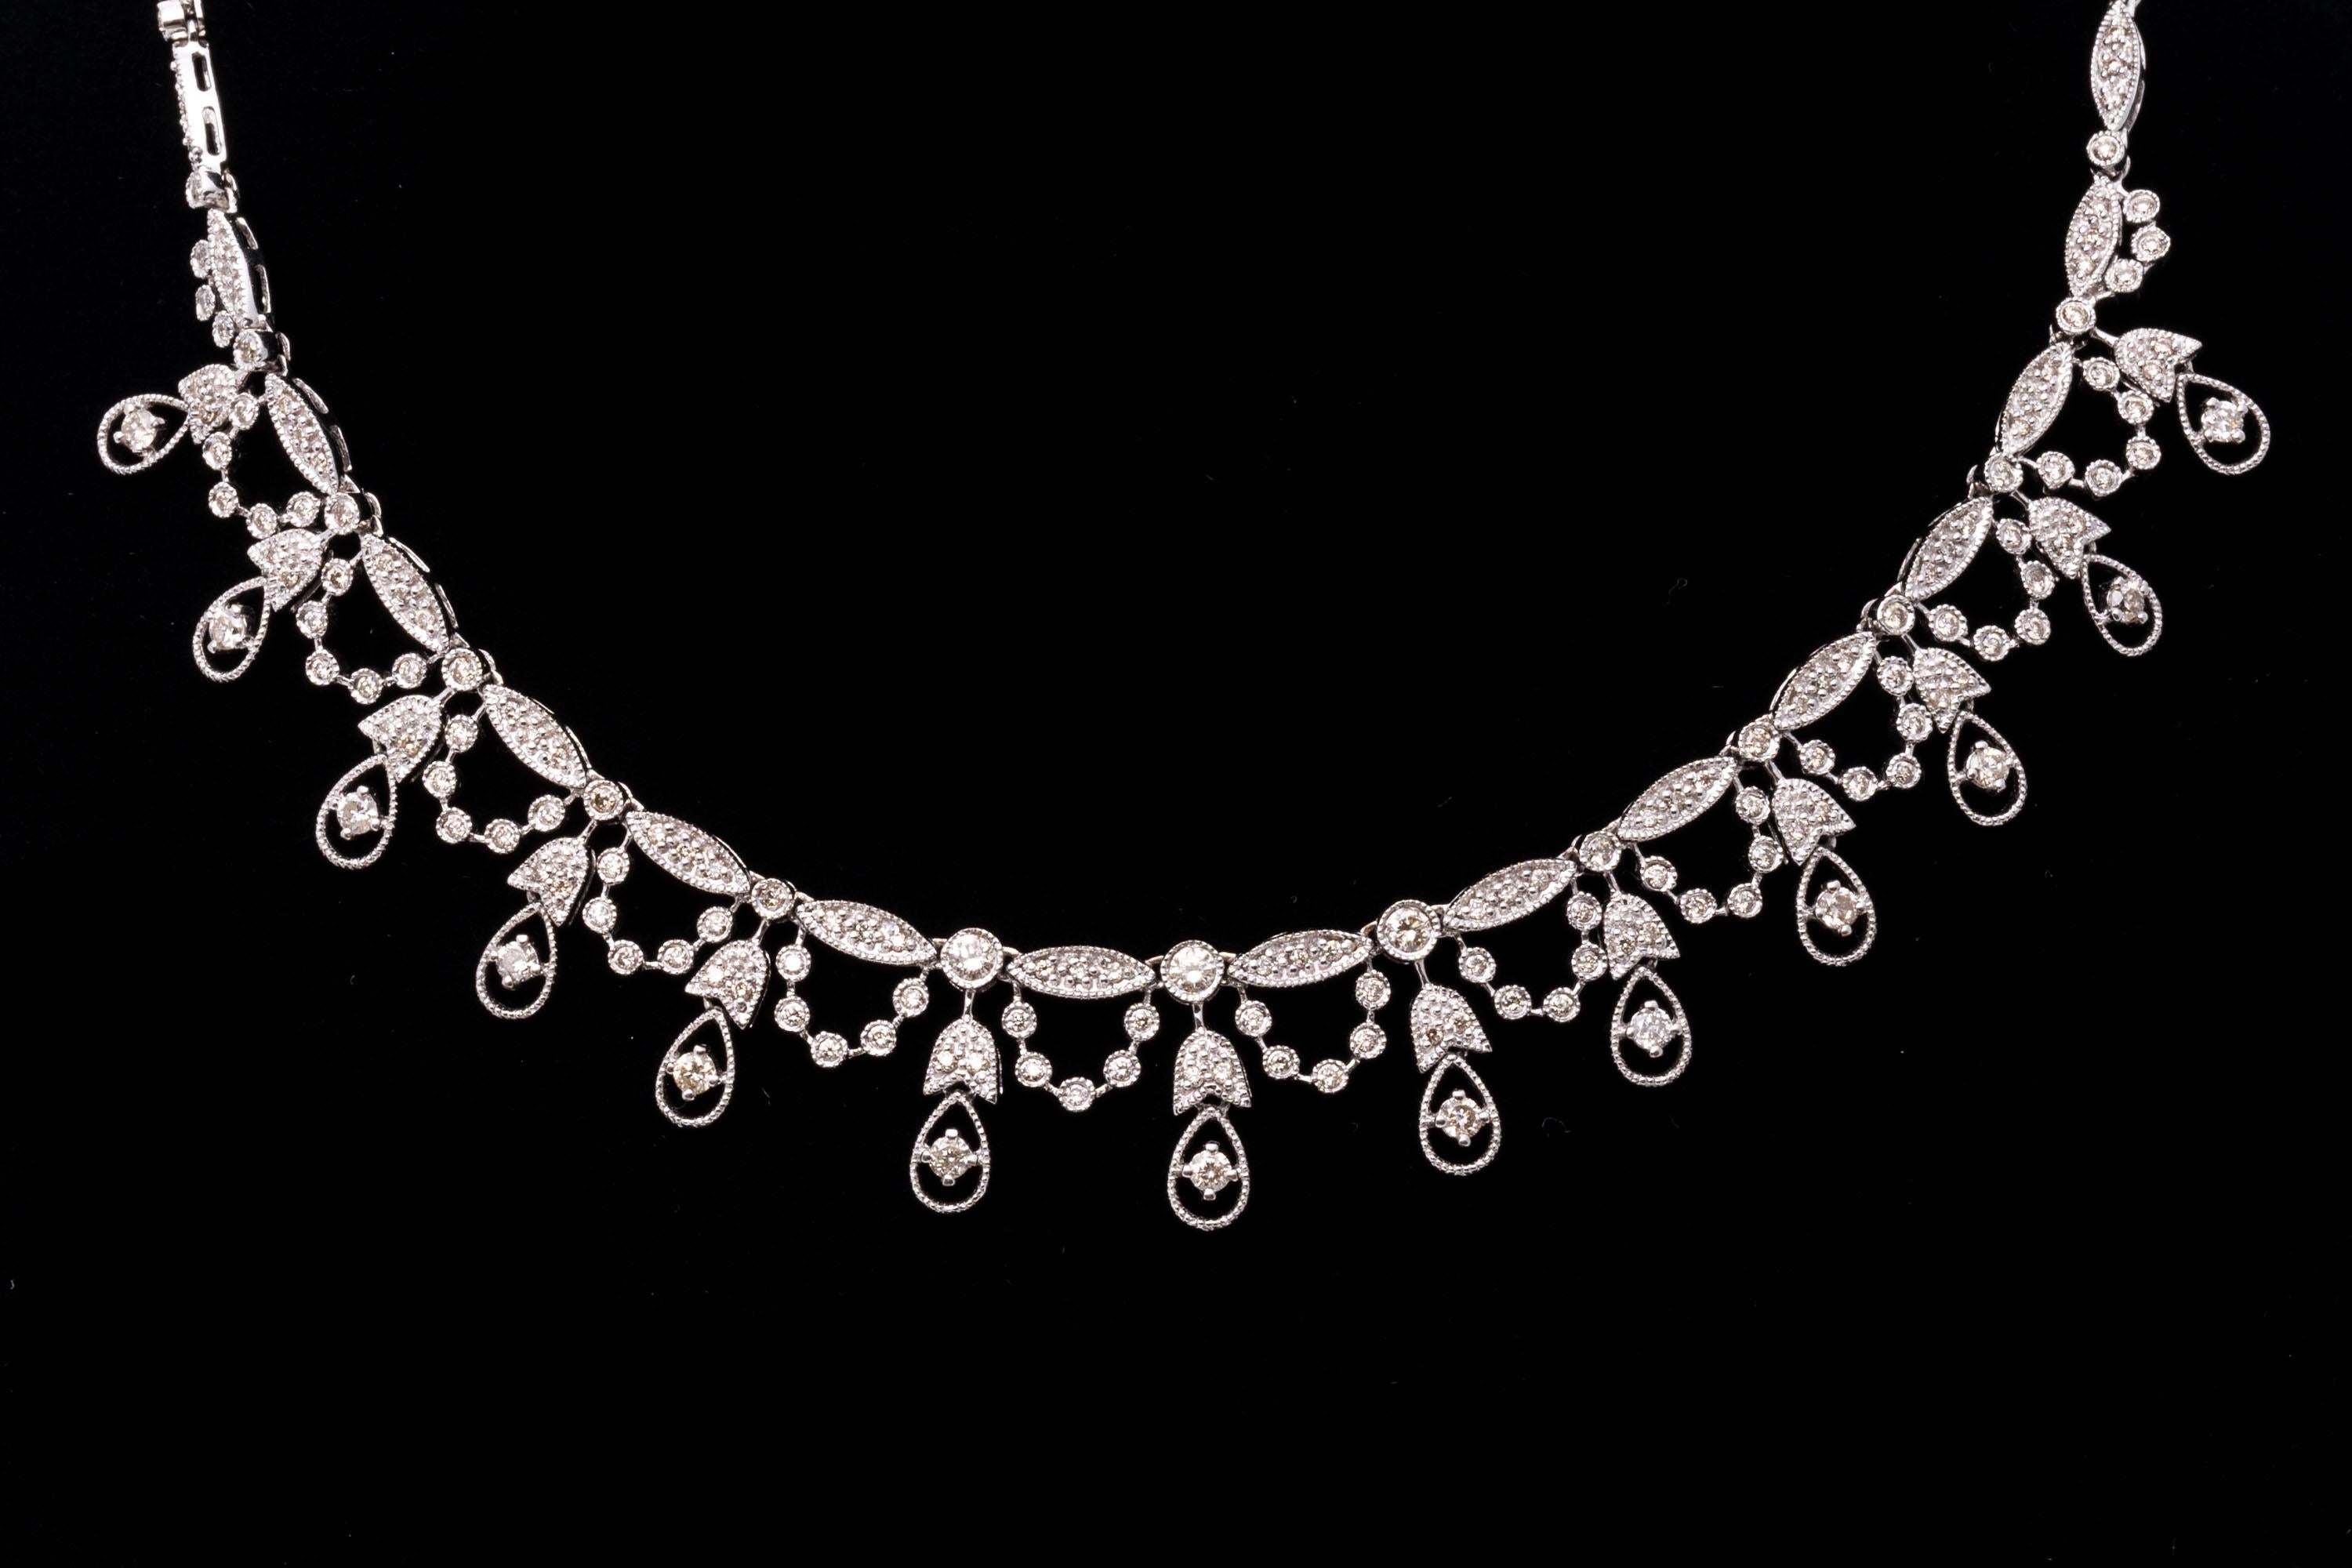 14k white gold necklace. This gorgeous necklace contains alternating oval and round links, milgrain edged and set with round faceted diamonds. The center of the necklace is decorated with tulip topped pear shaped links, alternating with festooned